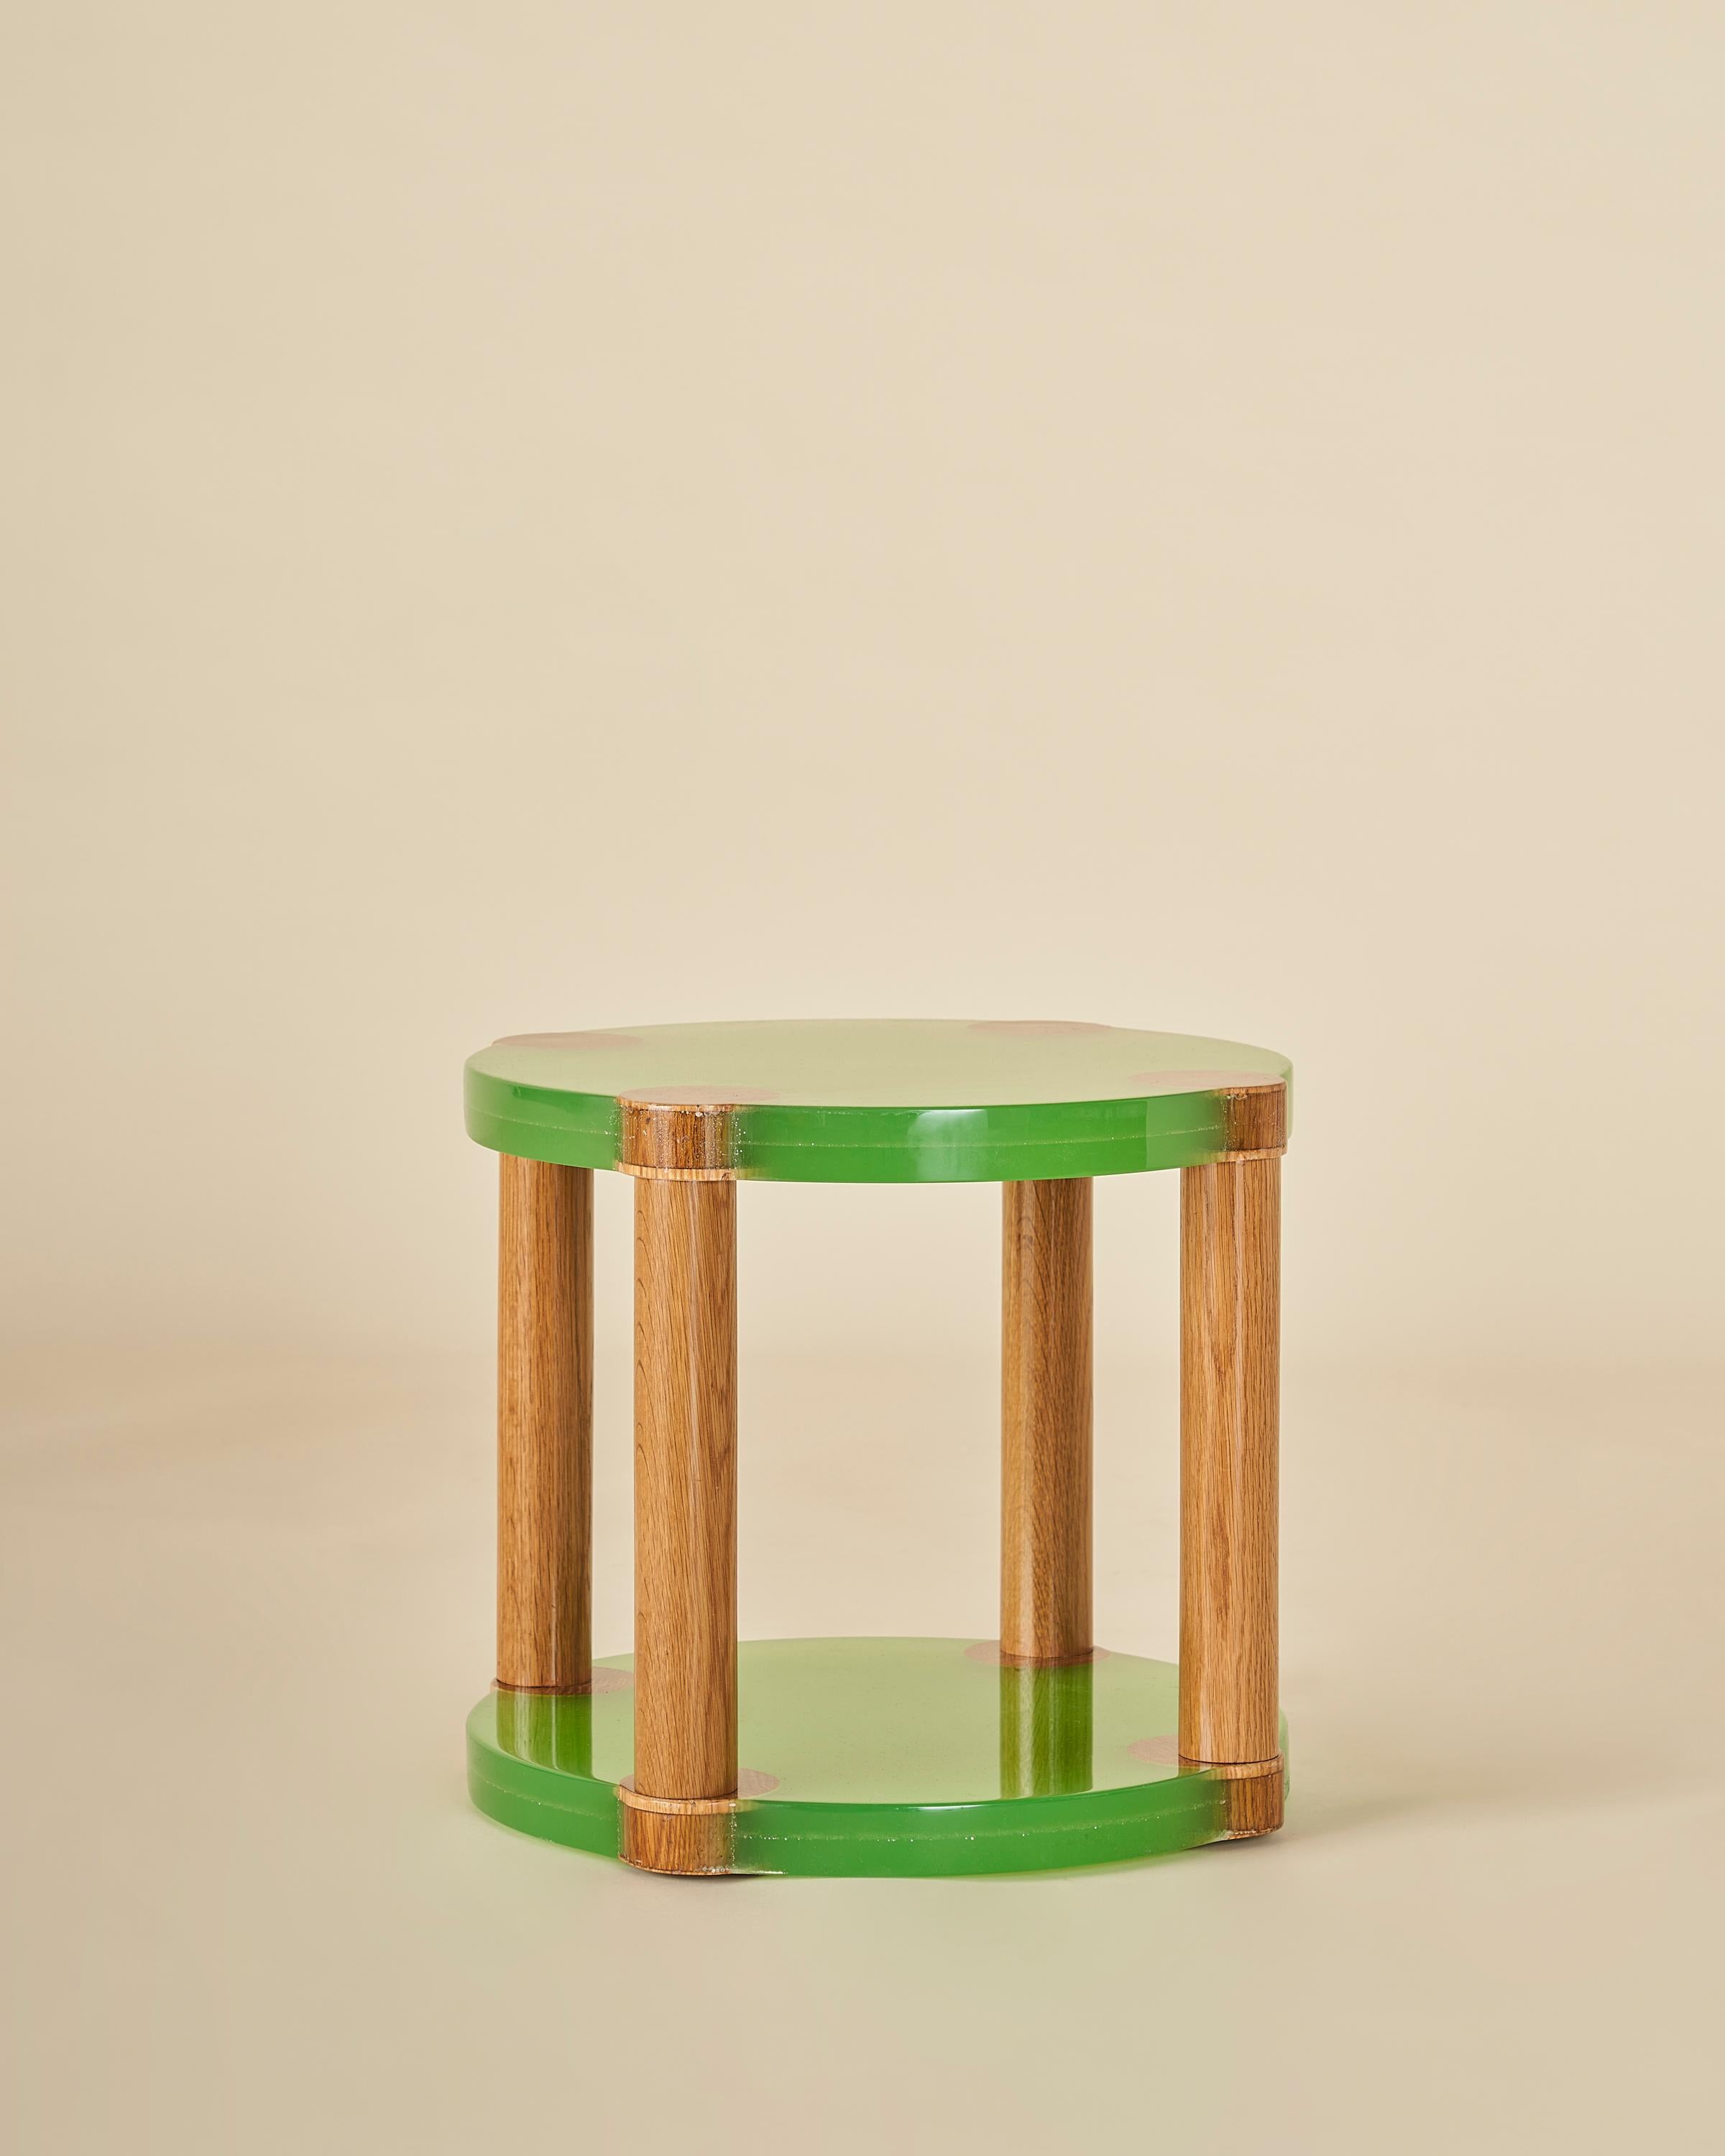 An eye-catching, yet timeless, handmade cast resin side table with four rounded solid oak legs. Each resin piece is hand-poured, so natural variation will occur. 

Our collection pays homage to the everlasting idea of home, a place that is alive as